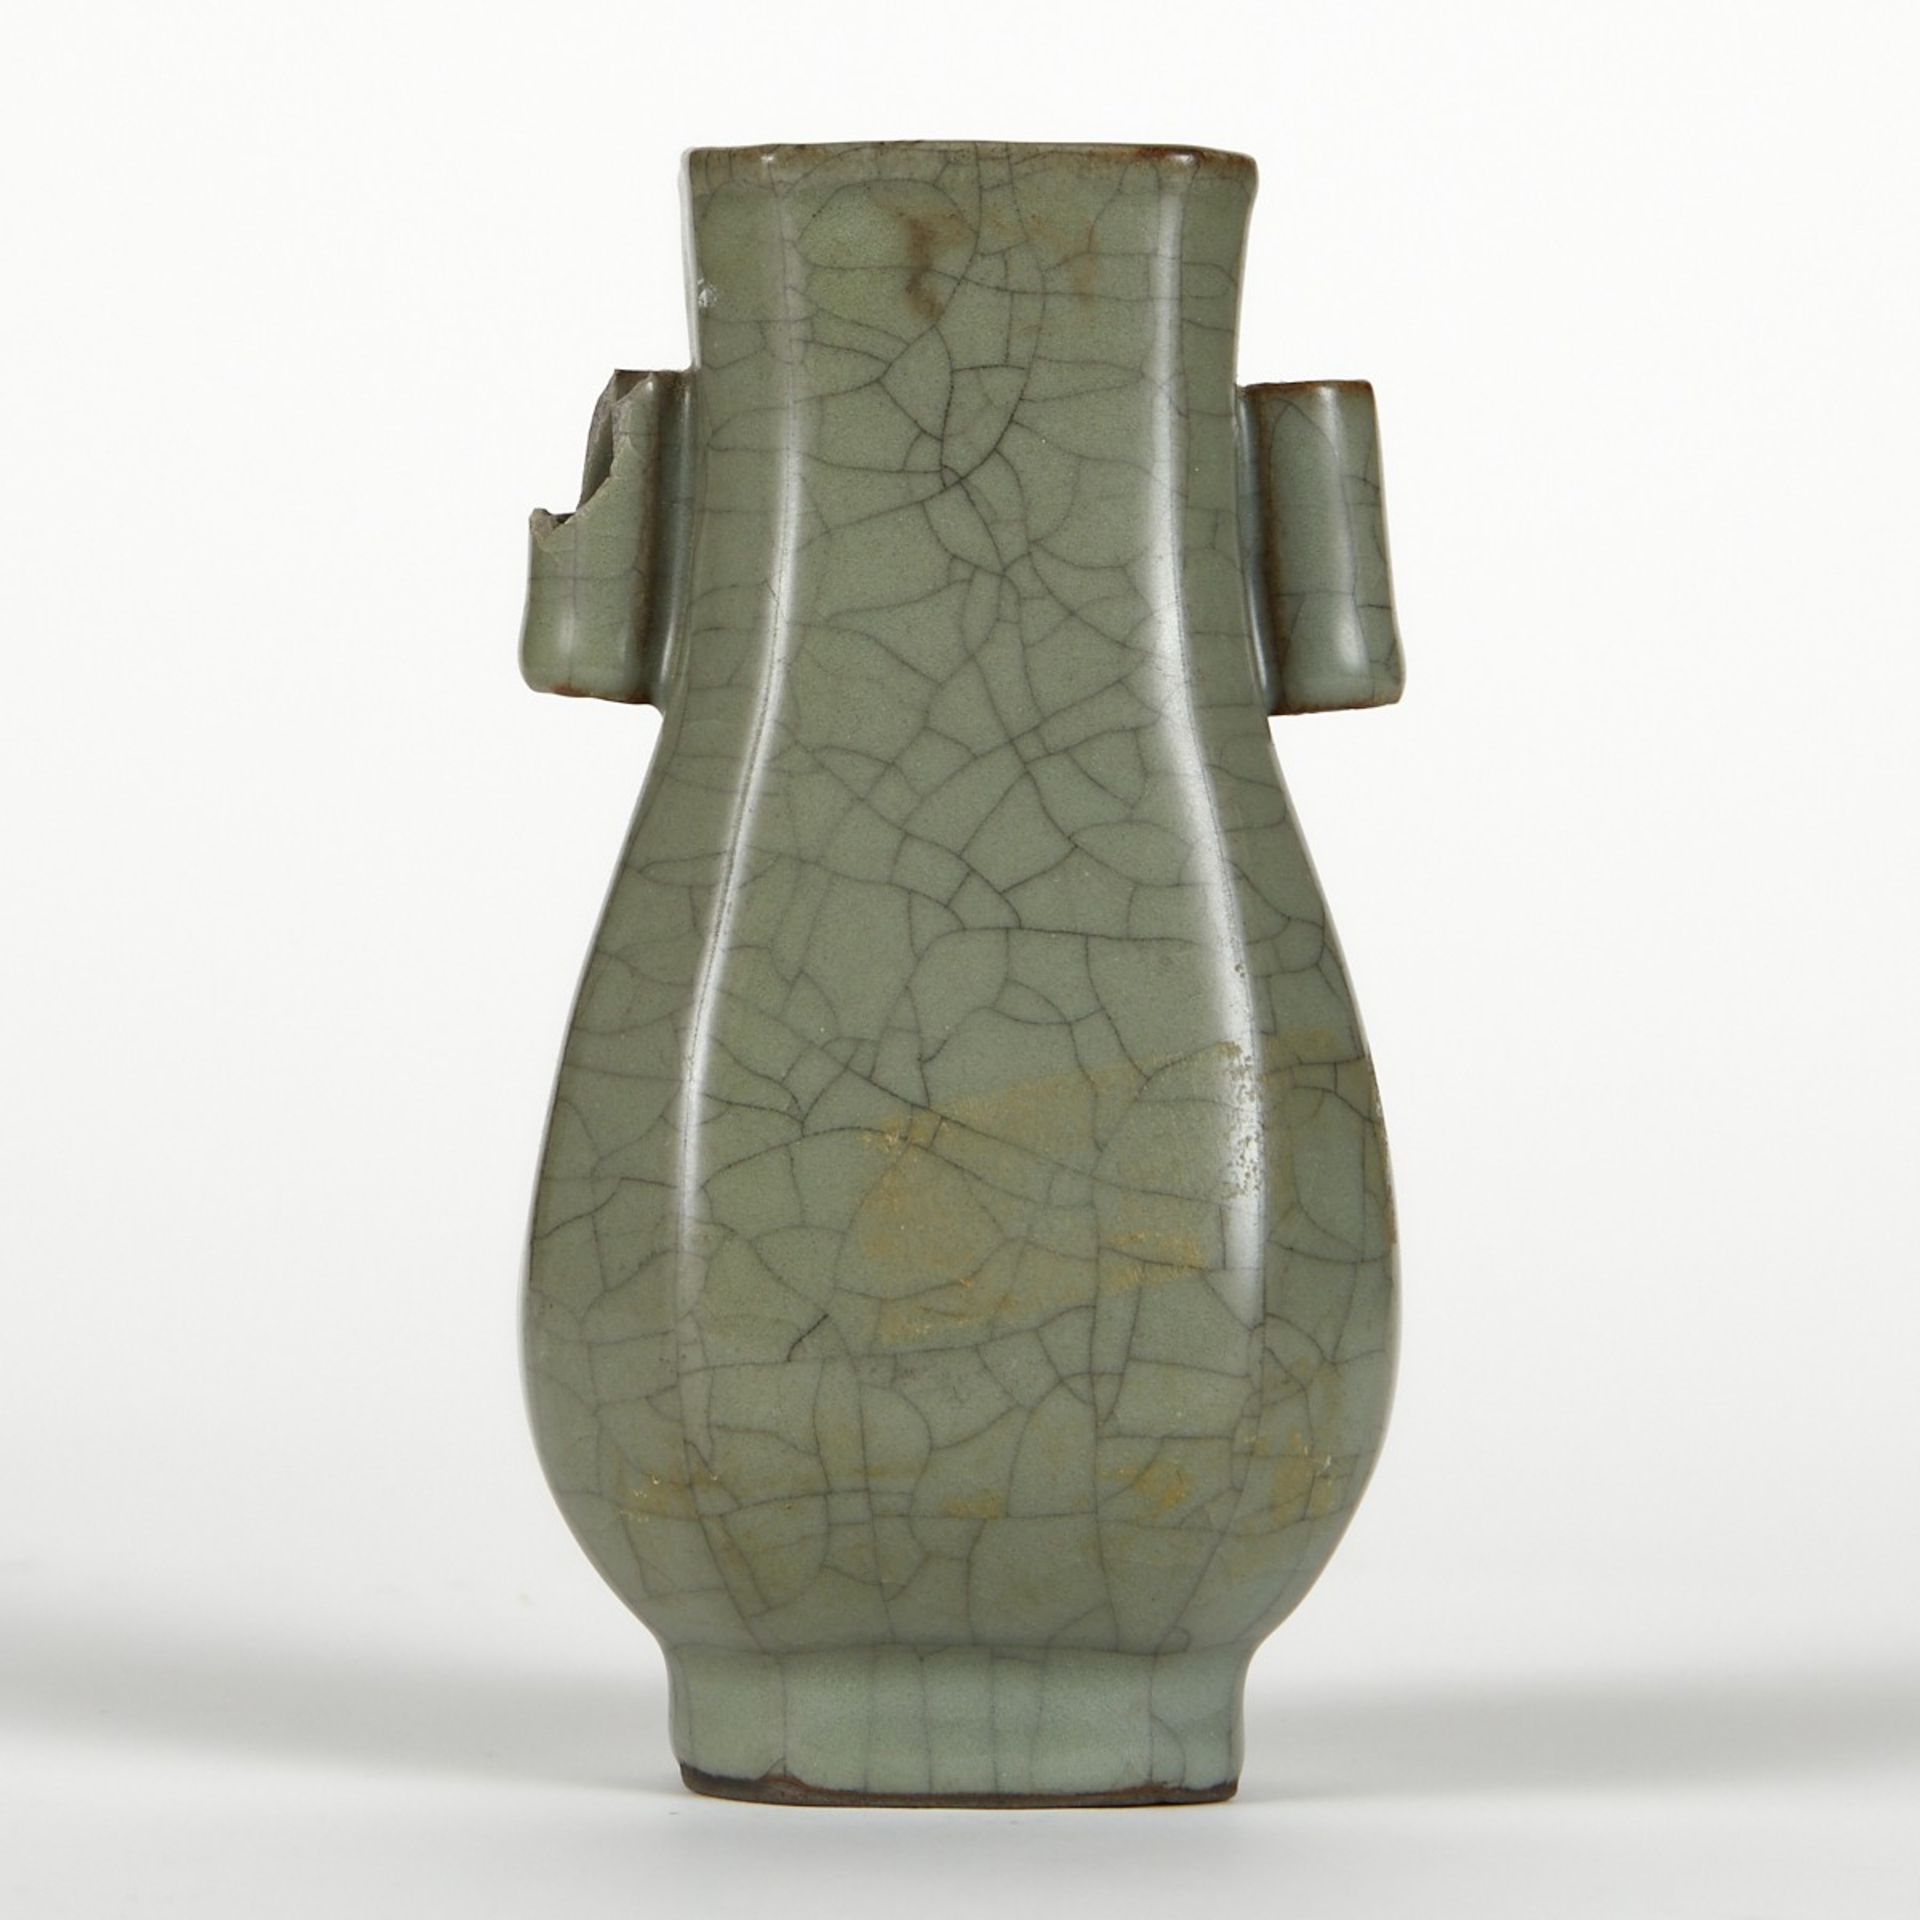 Chinese High Fired Ceramic Crackle Hu Vase - Image 2 of 7